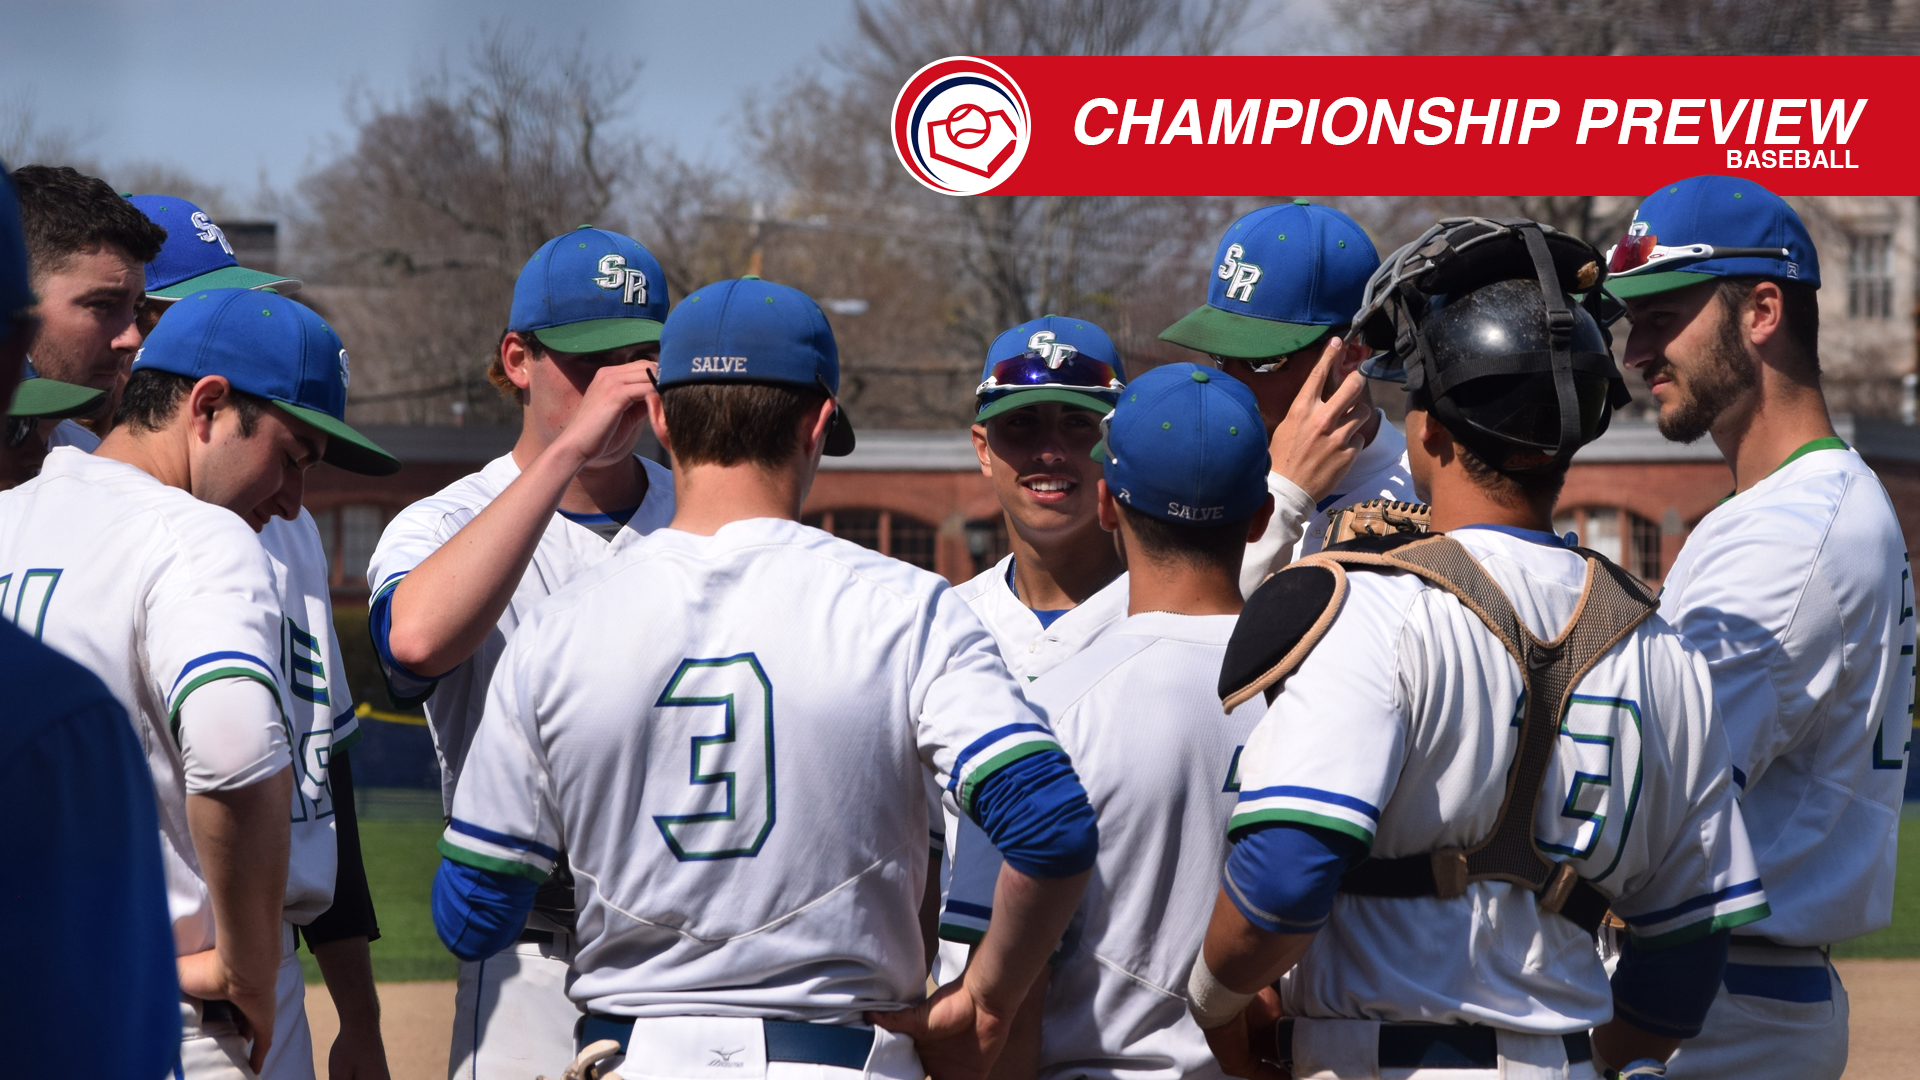 No. 1 seed Salve Regina hosts No. 3 Western New England in best-of-three championship series starting Friday afternoon.